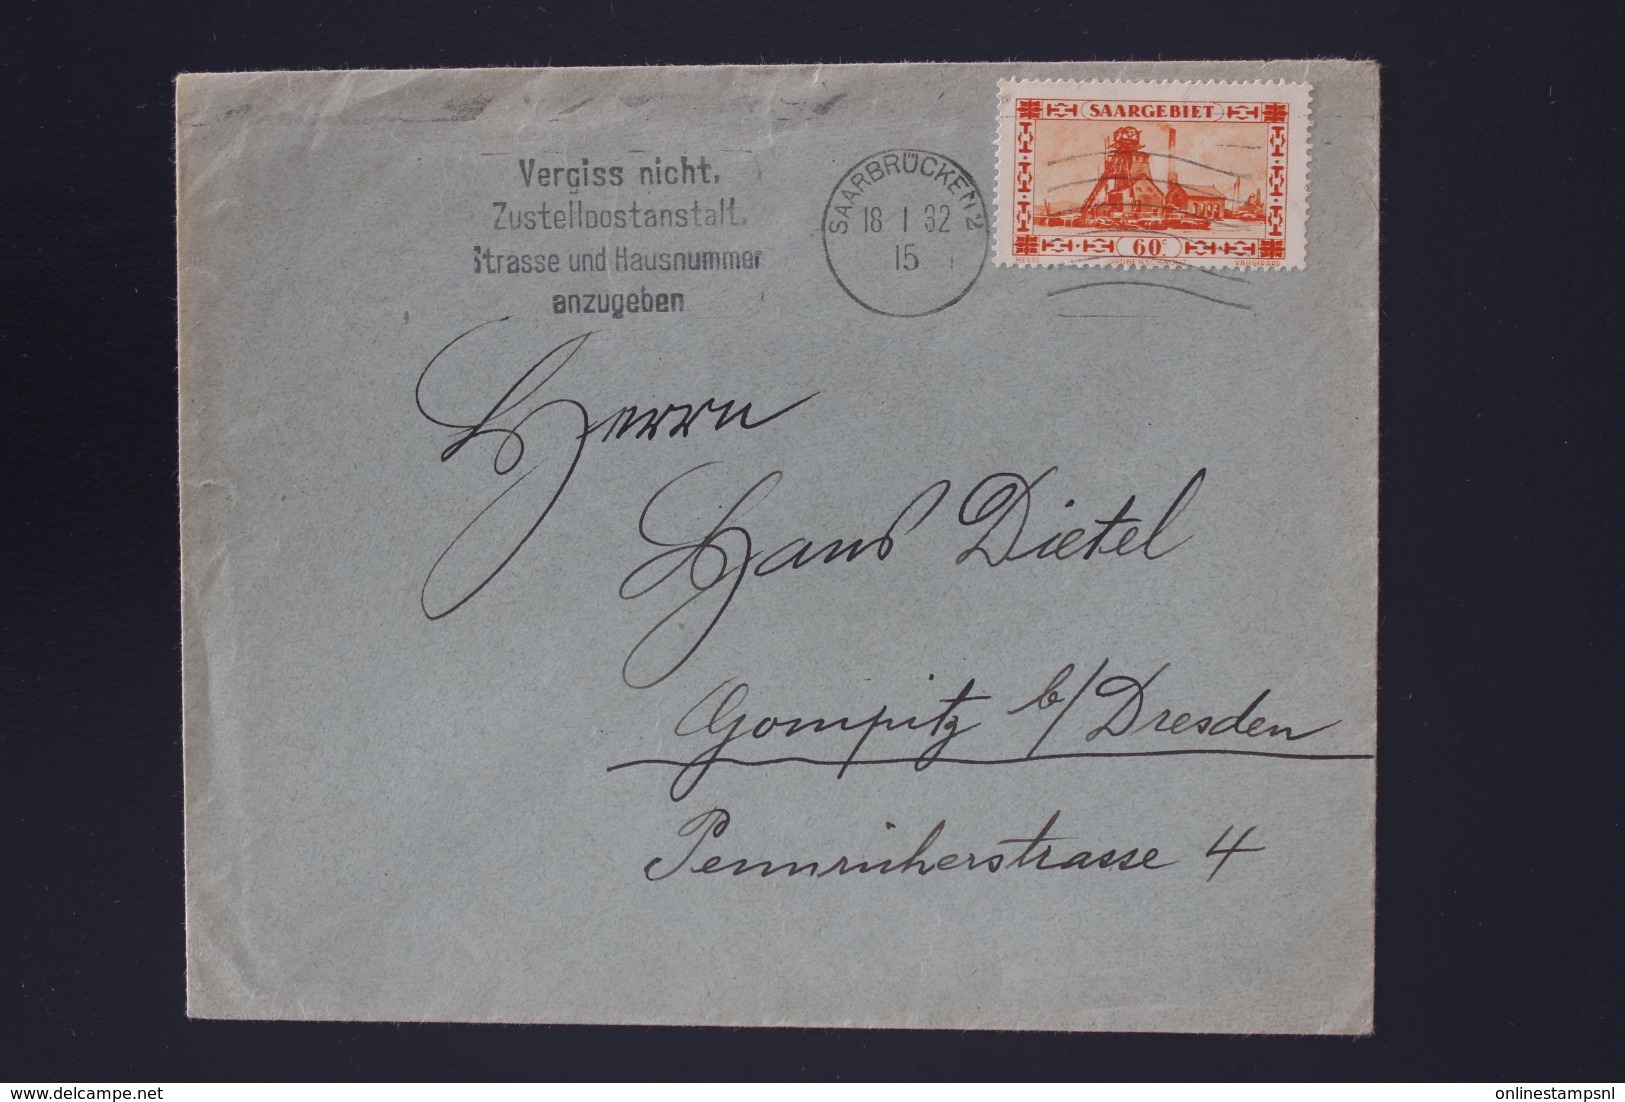 Saar and Saarland collection of 18 Postcards and covers between 1920 - 1958, mostly used